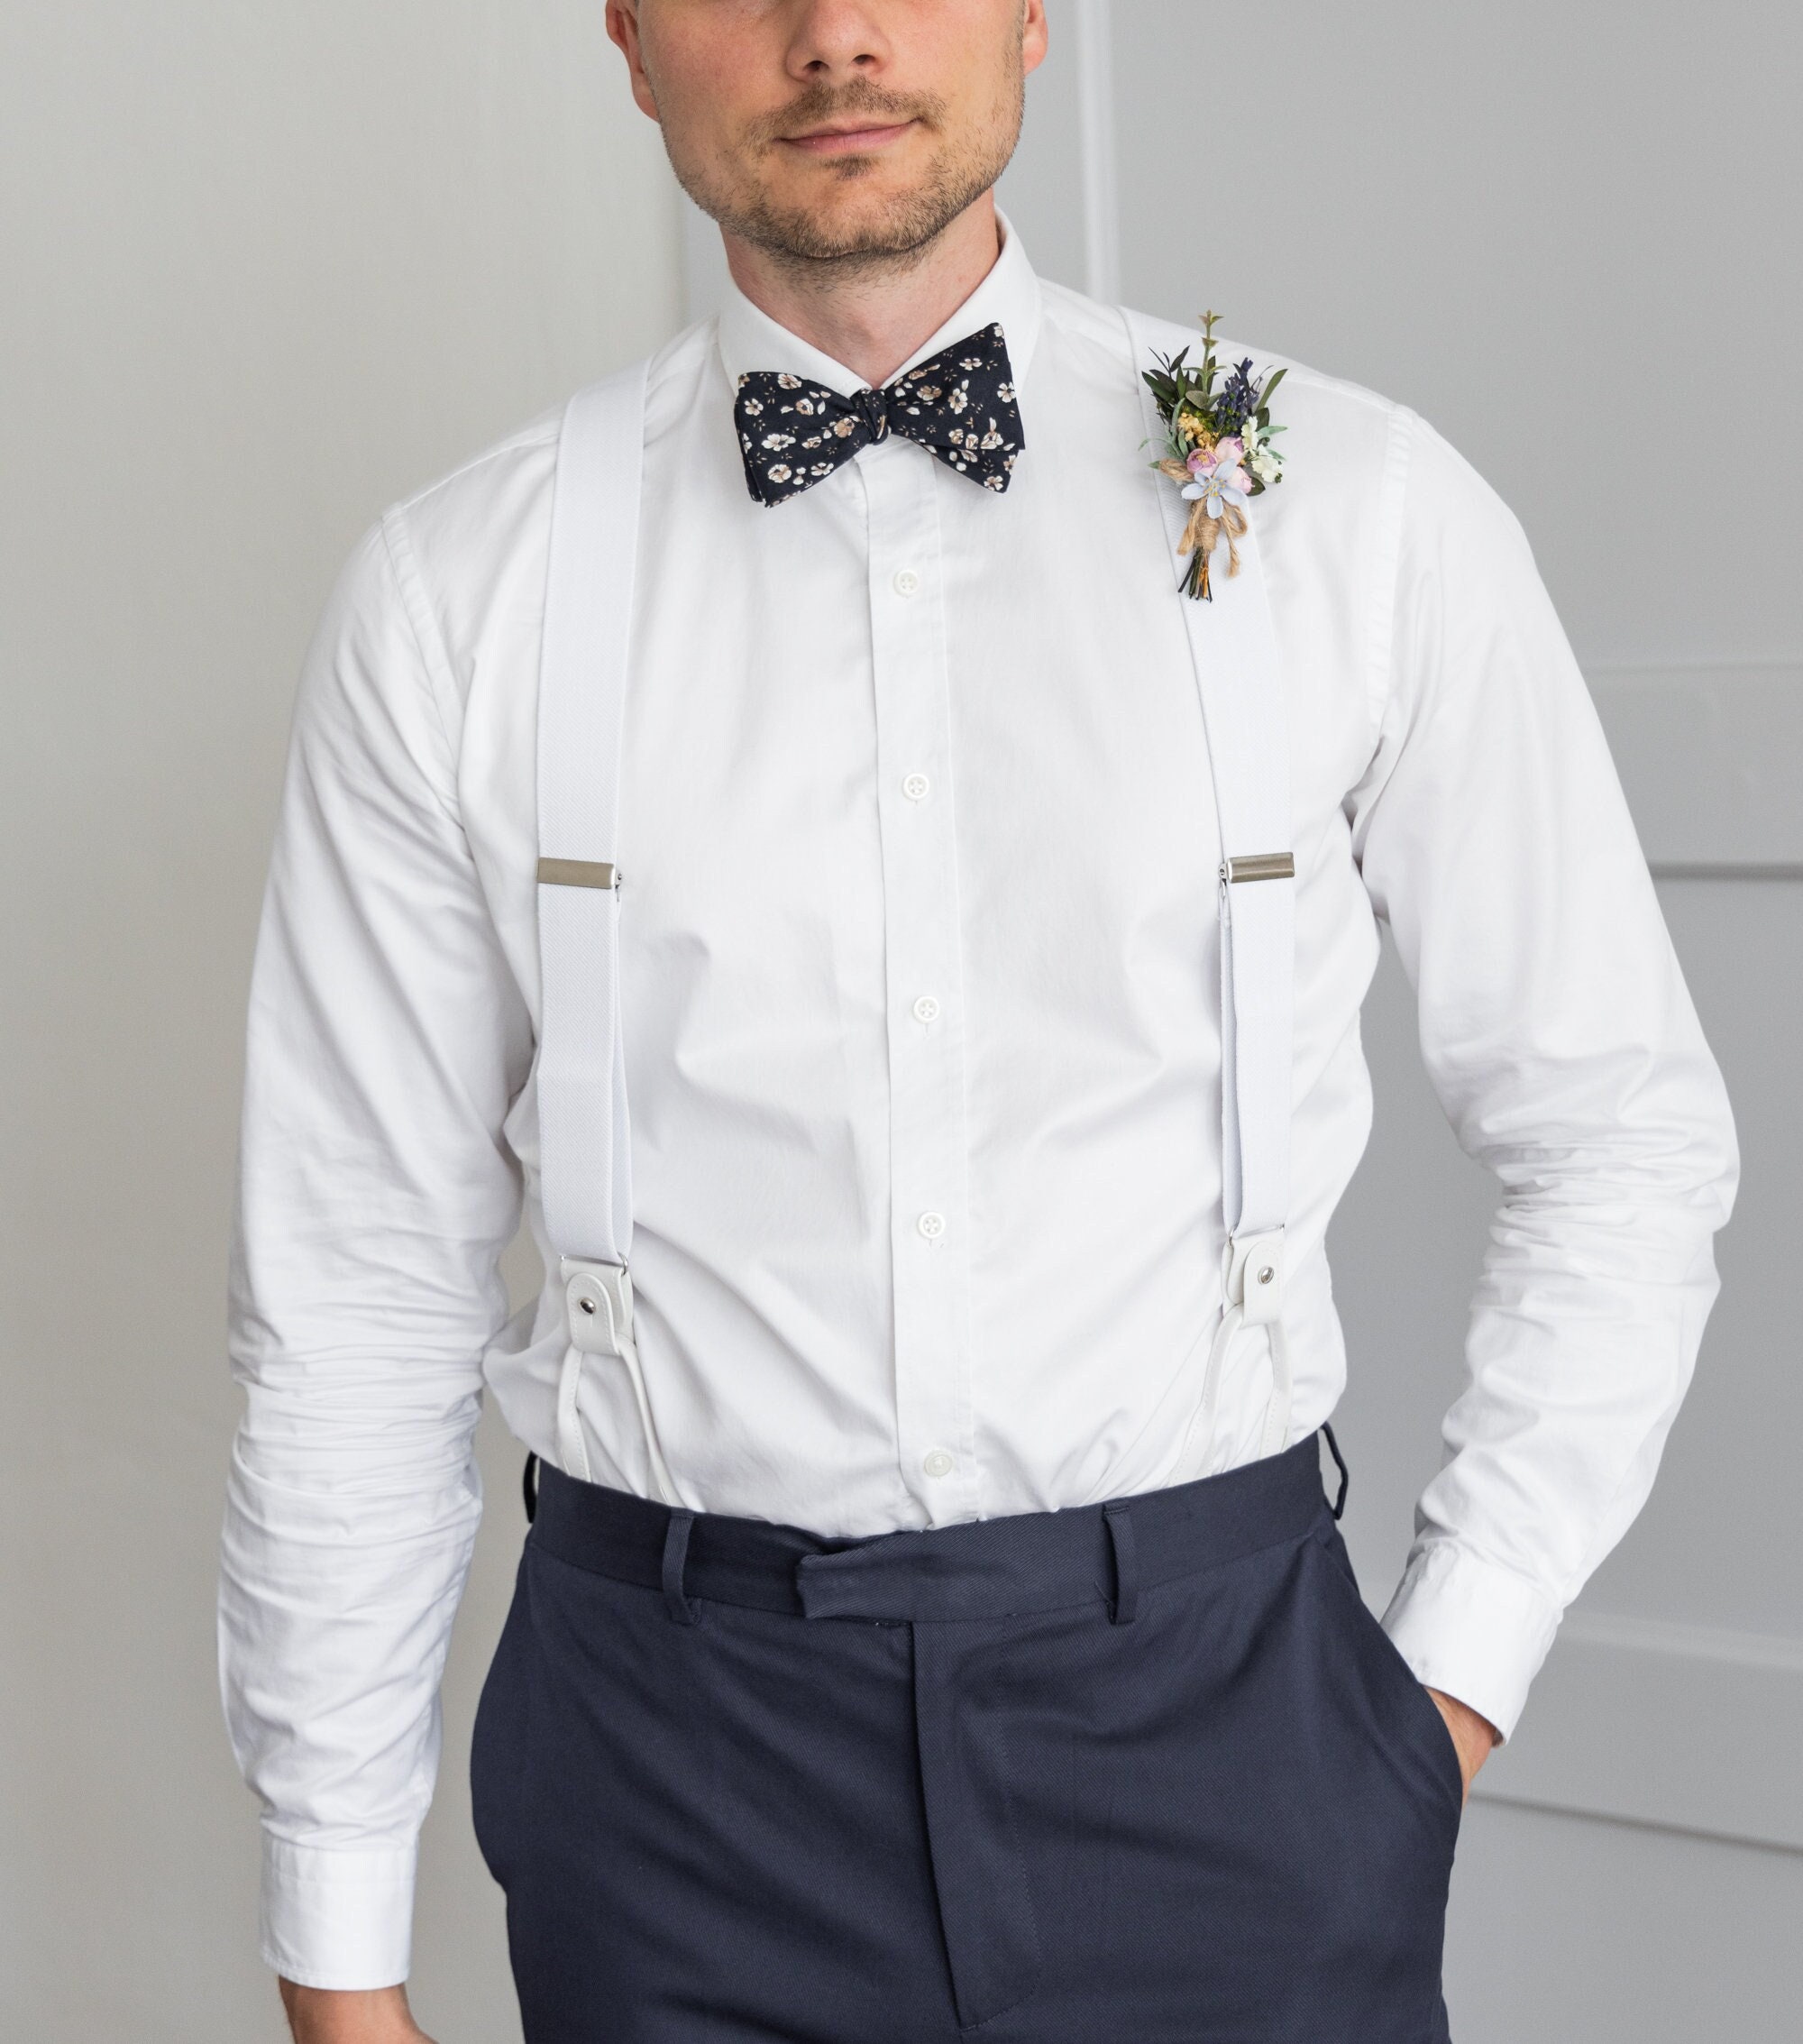 White Suspenders for Men, Button and Clip Suspenders for Groom Groomsmen,  Tuxedo Wedding Suspenders -  Norway